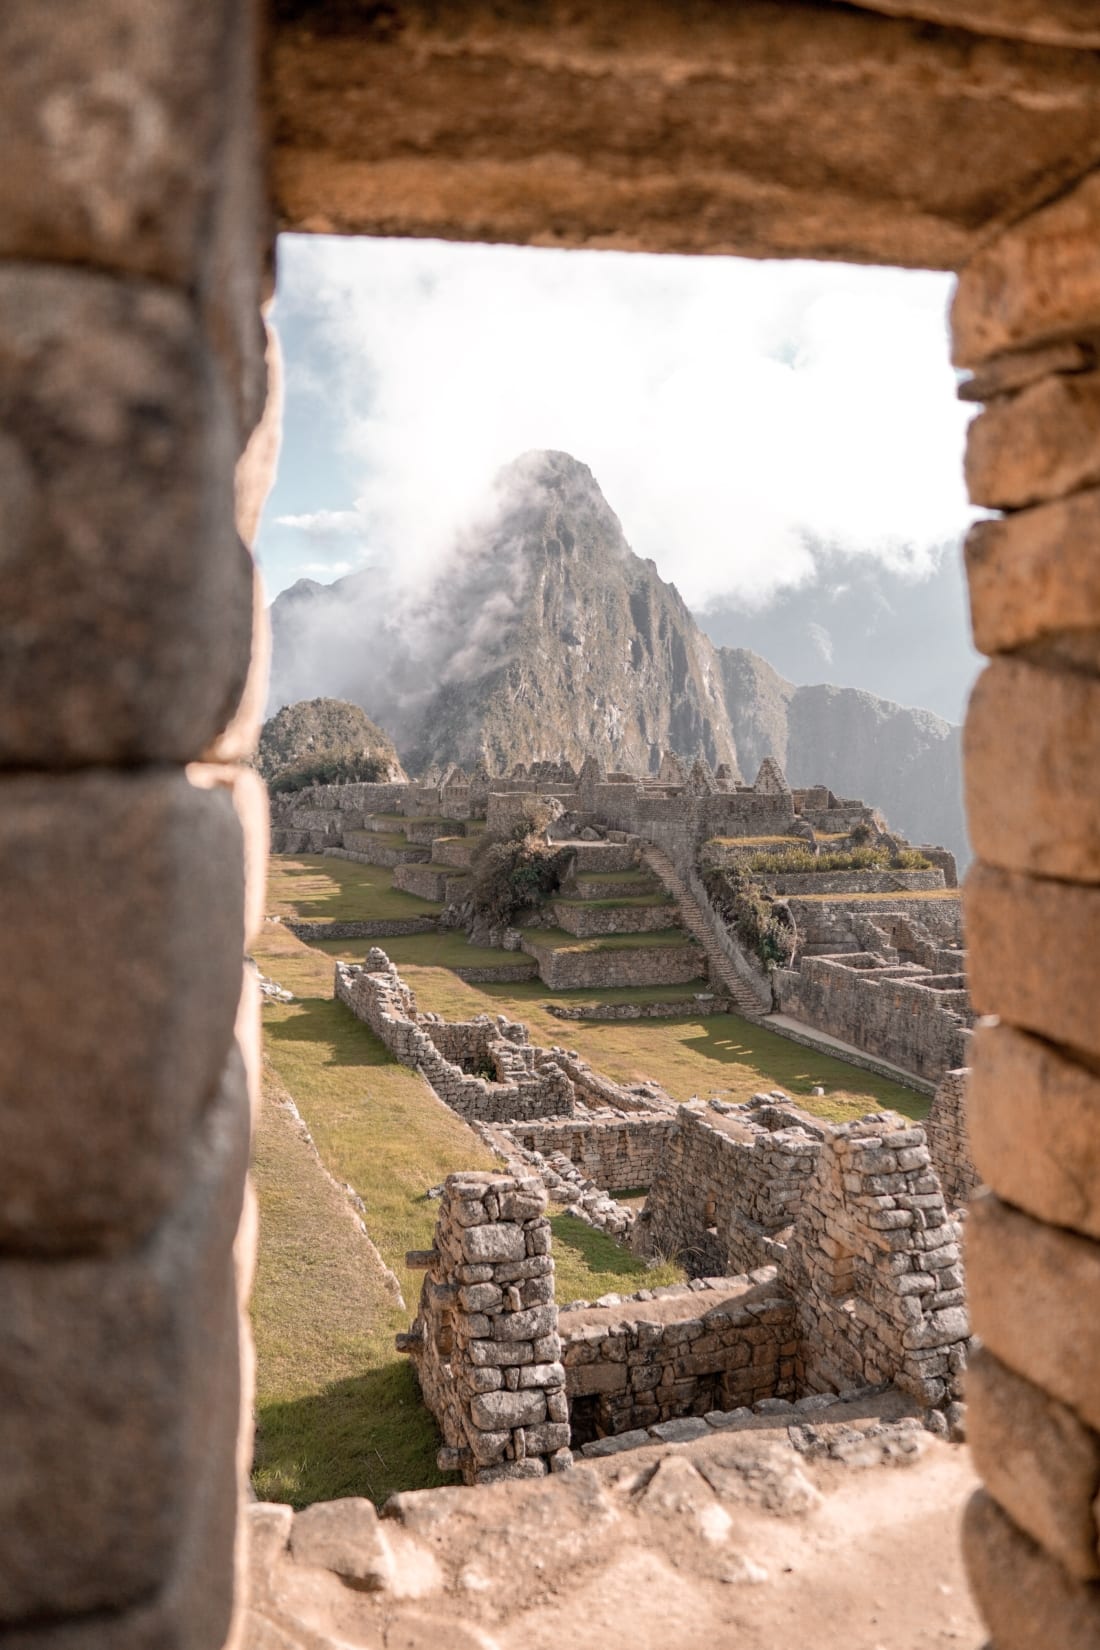 A photograph of Machu Picchu taken from inside a doorway at the citadel